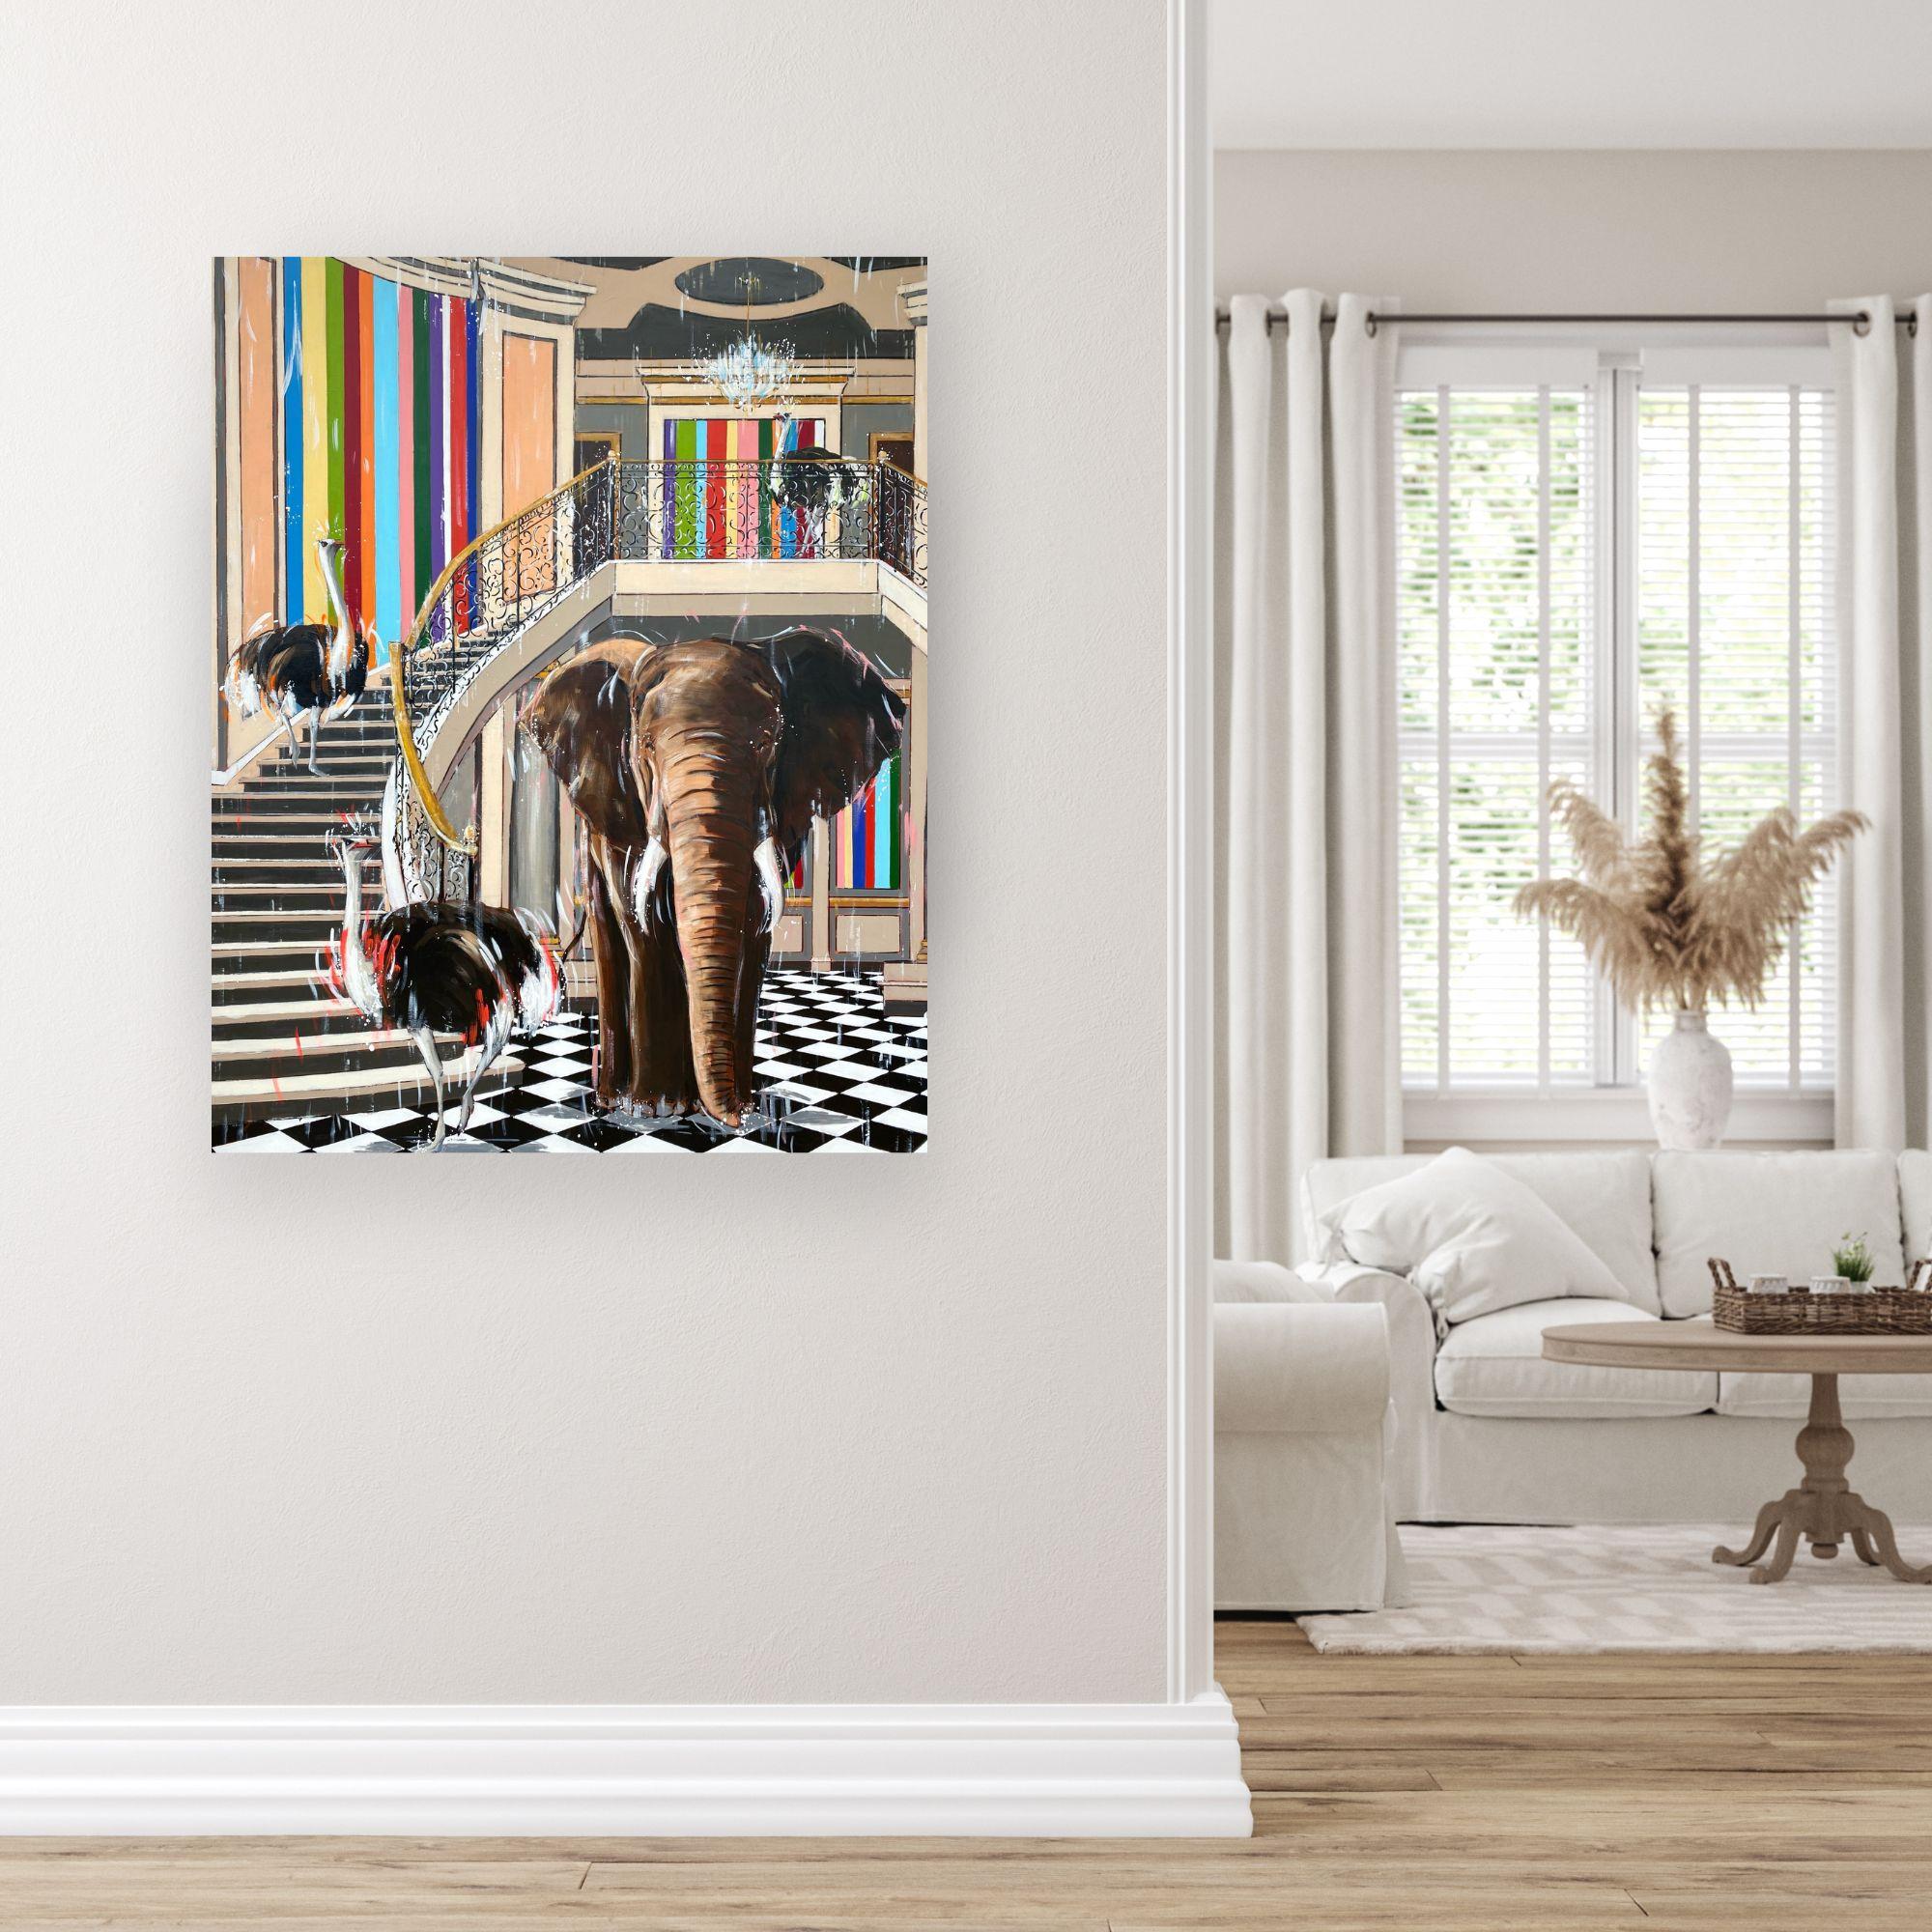 Serenisima-original wildlife surreal interior abstract painting-contemporary art For Sale 2